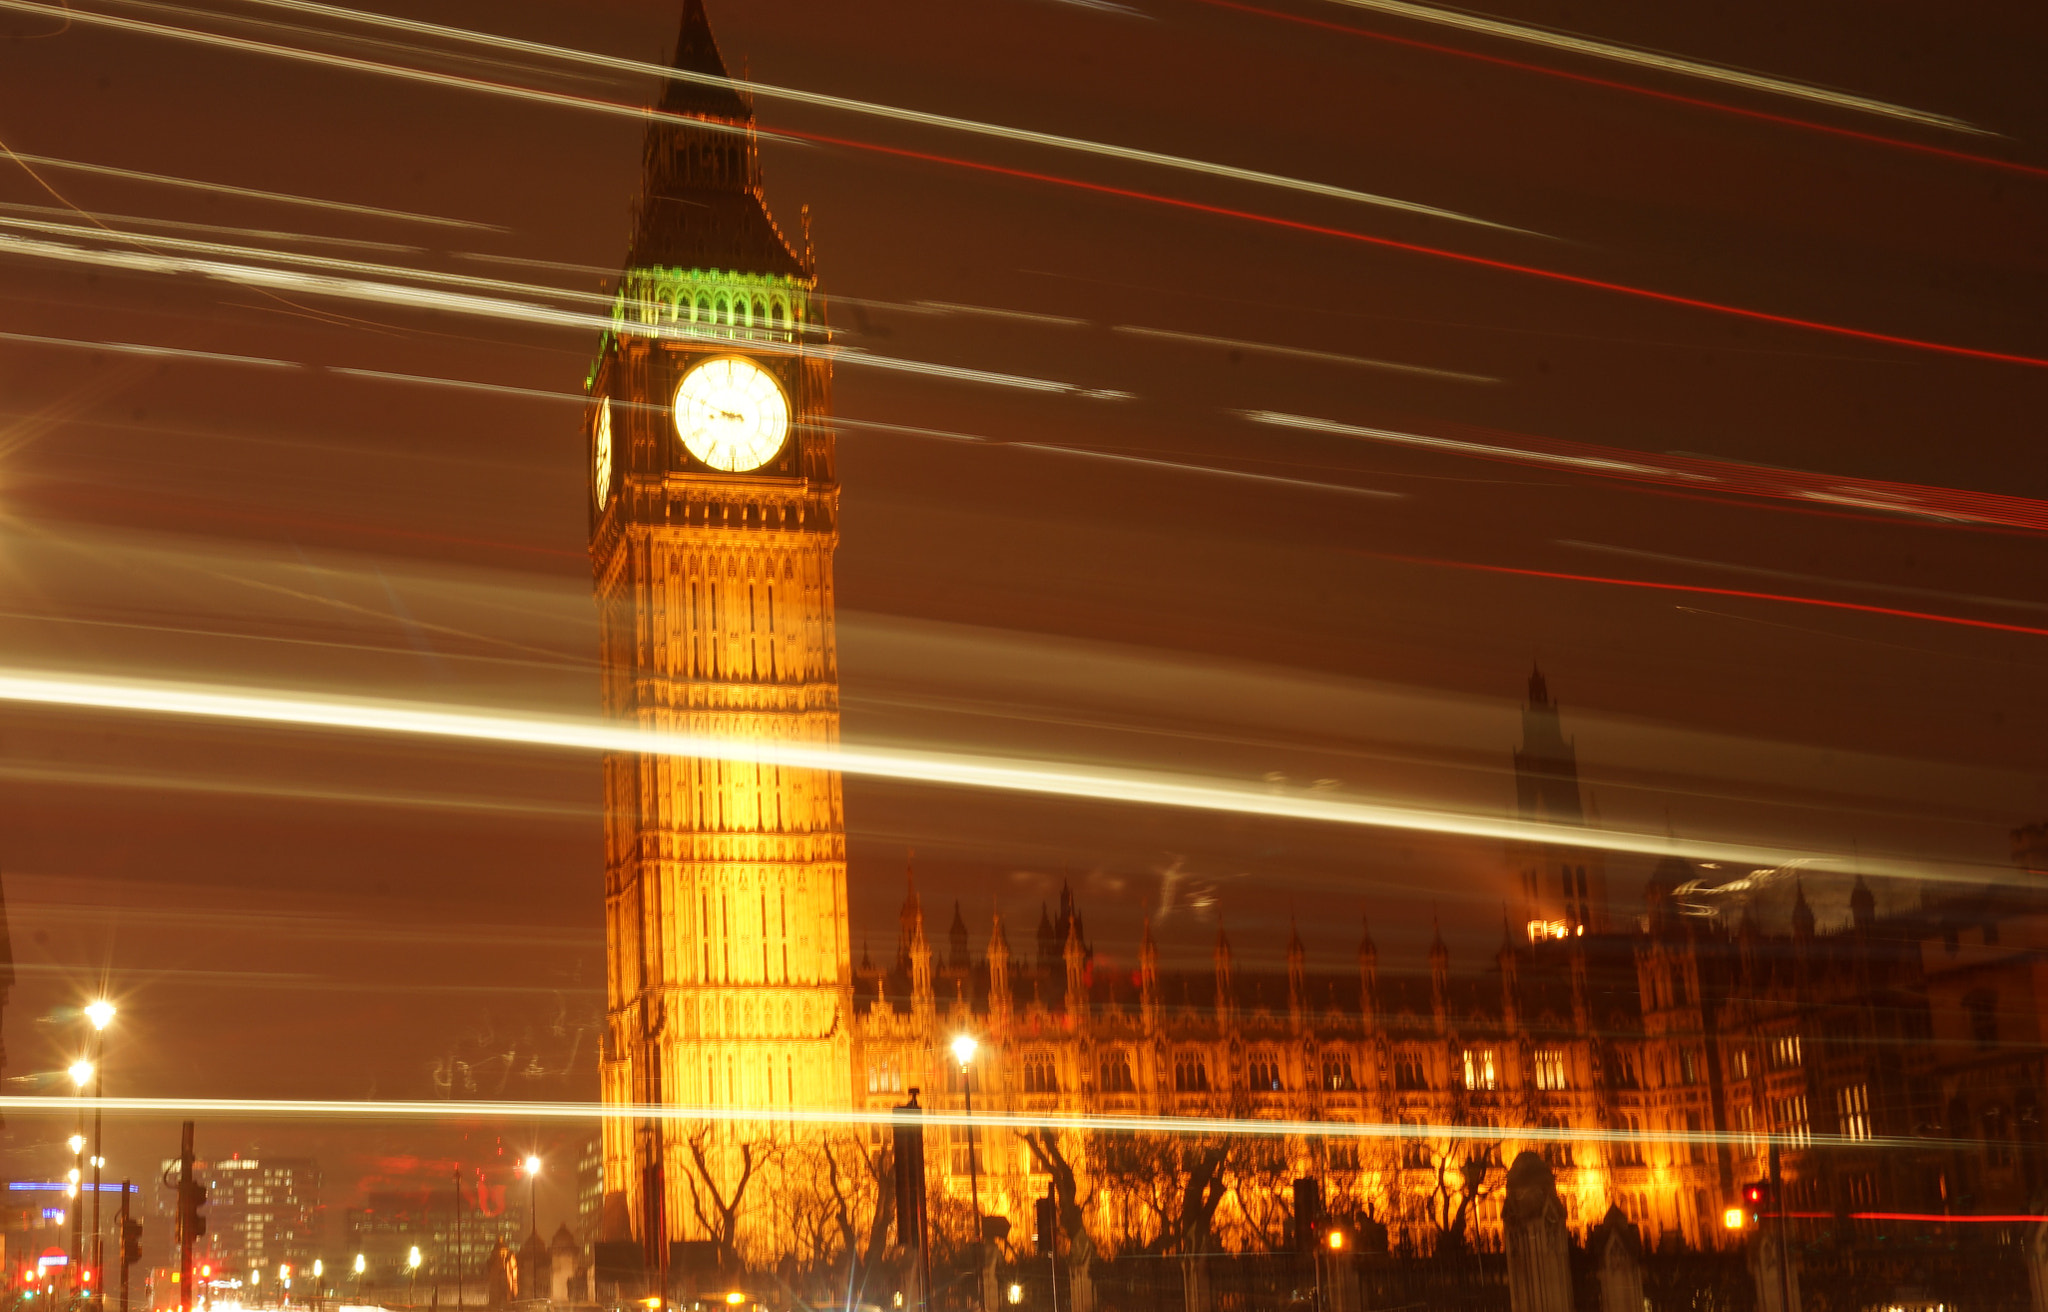 Sony a7 sample photo. Big ben and the parlament - at long explosure photography